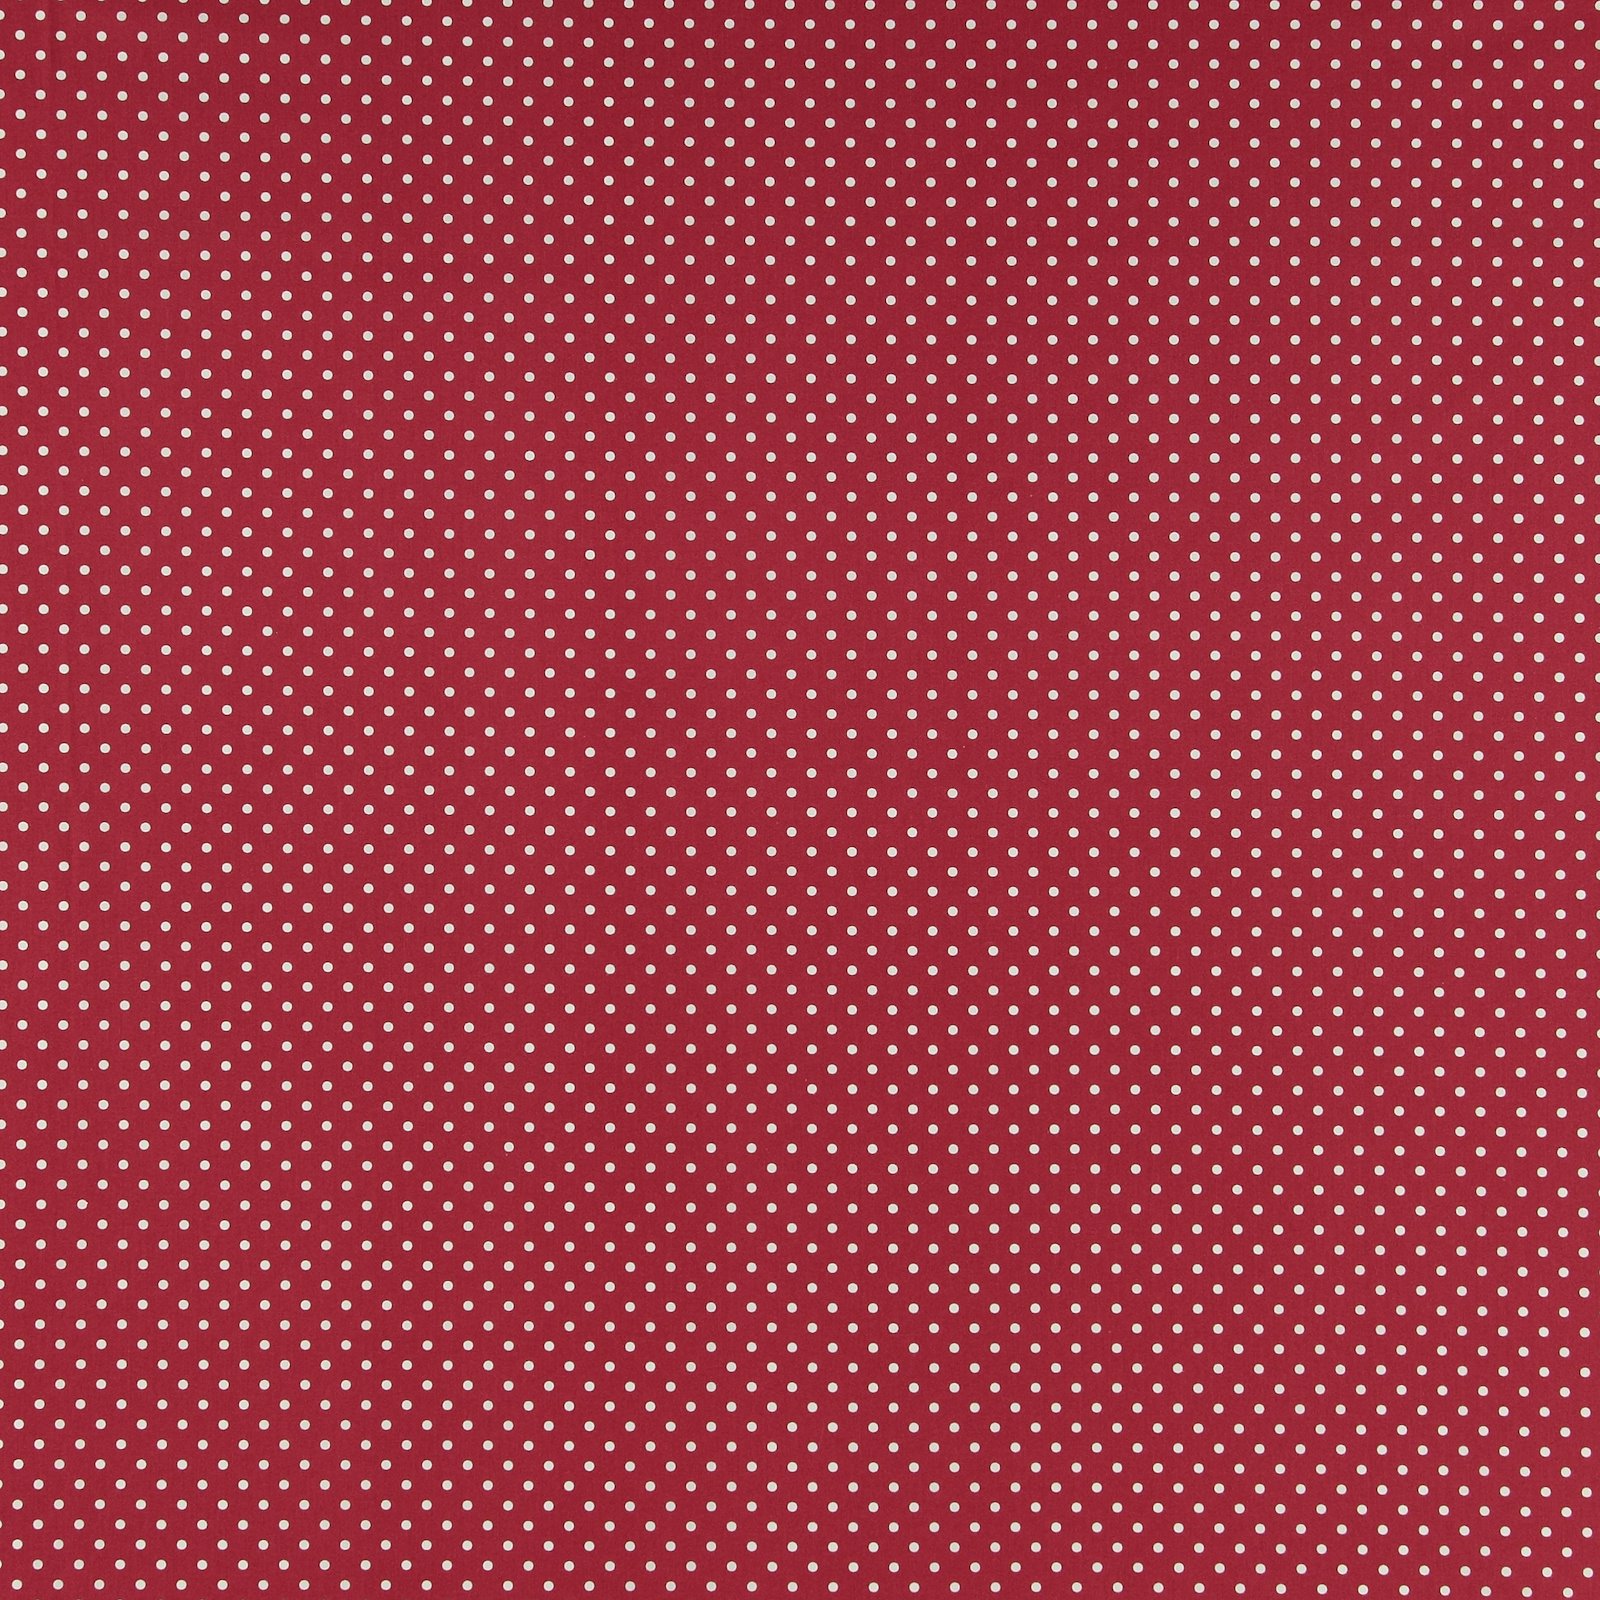 Cotton red with white dots 790122_pack_sp